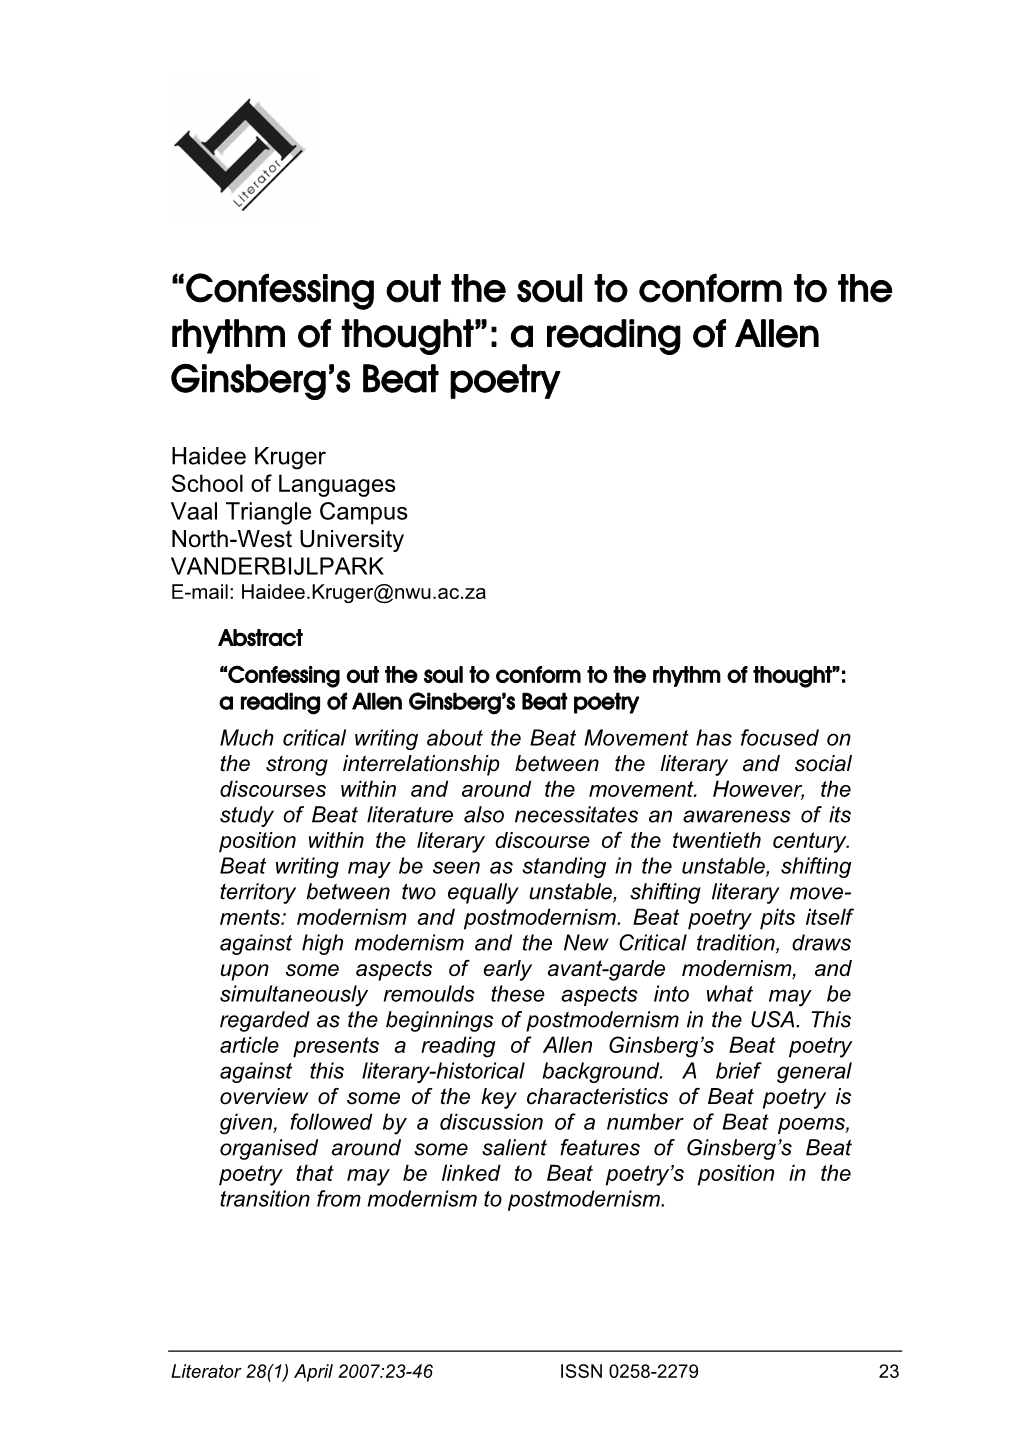 A Reading of Allen Ginsberg's Beat Poetry